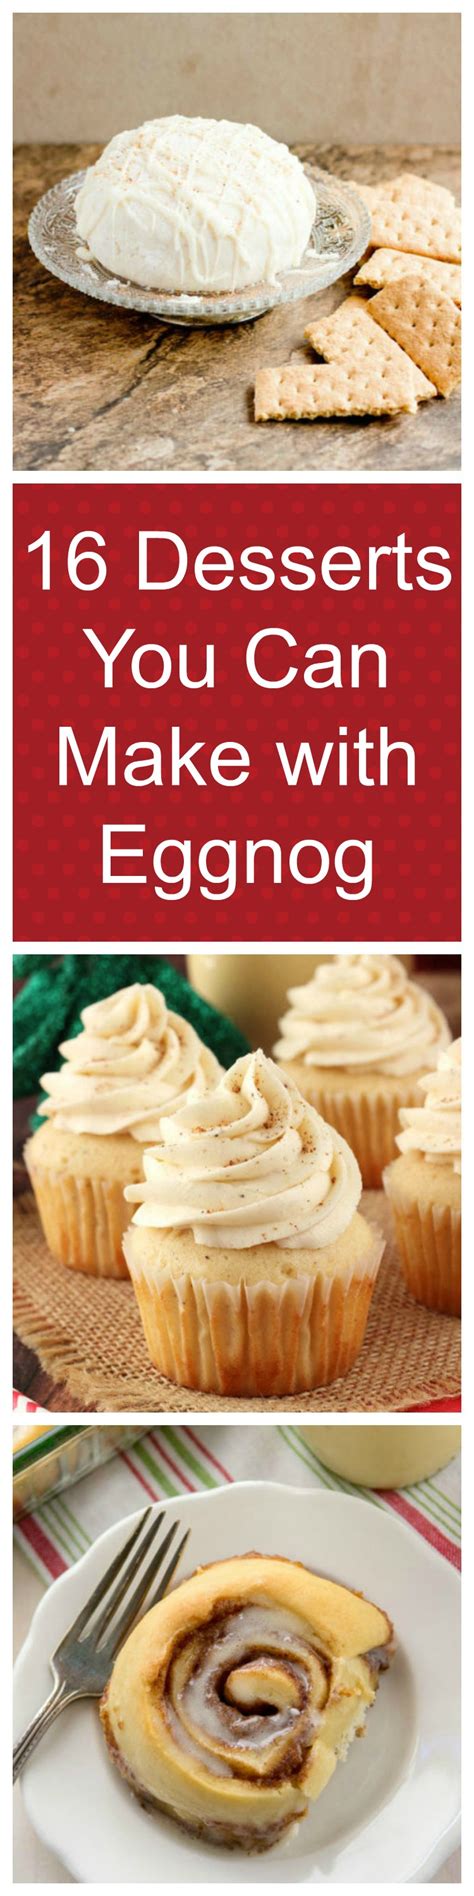 Unique recipes you'll lovehave you ever heard that breakfast is one of the most important from pancakes to egg recipes, this video has it all for you. 19 Delicious Eggnog Desserts That Don't Require a Mug | Desserts, How sweet eats, Eggnog dessert